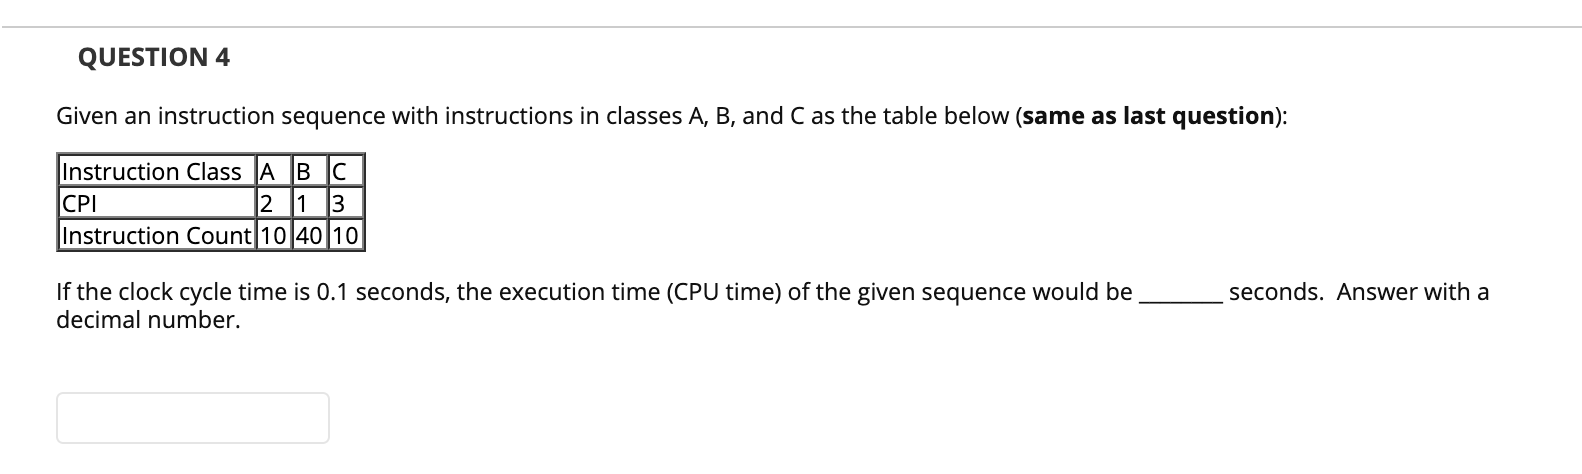 QUESTION 4
Given an instruction sequence with instructions in classes A, B, and C as the table below (same as last question):
Instruction Class A B C
CPI
Instruction Count 10 40 10
2 1 3
If the clock cycle time is 0.1 seconds, the execution time (CPU time) of the given sequence would be
decimal number.
seconds. Answer with a
